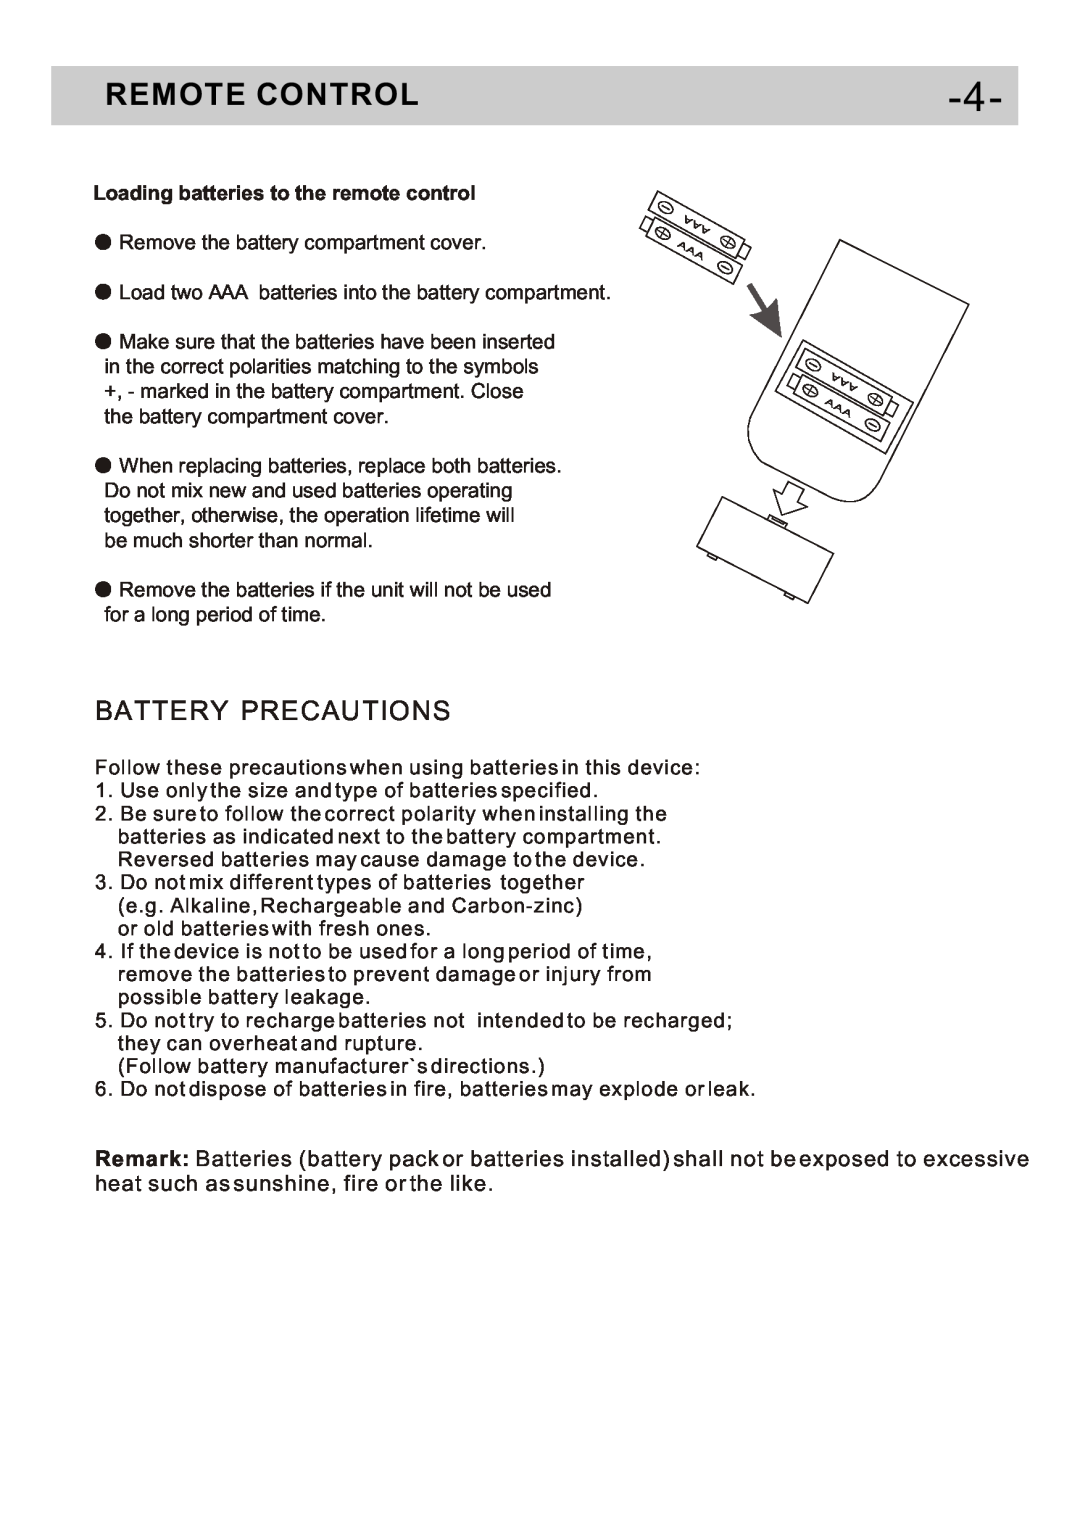 Curtis DVD5091UK user manual Remote Control, Battery Precautions, Loading batteries to the remote control 